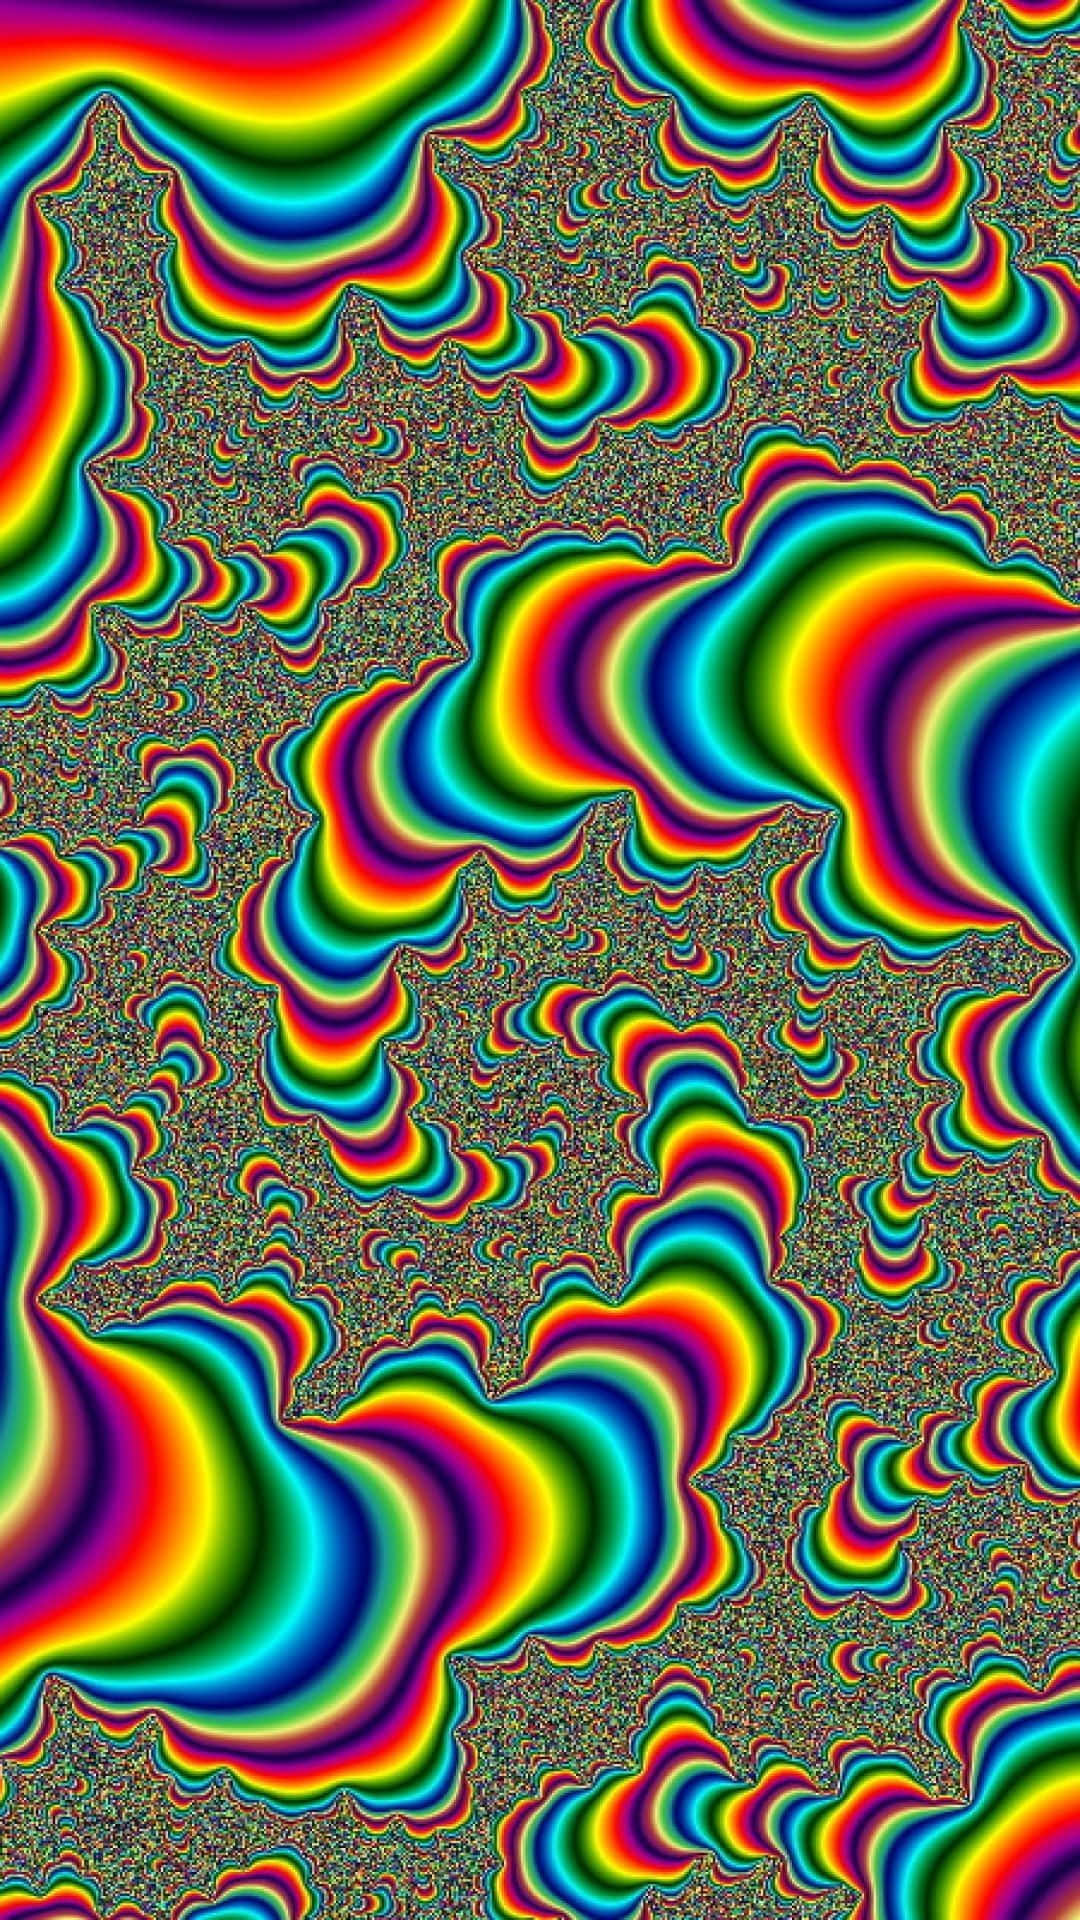 A Colorful Psychedelic Image With Rainbow Waves Background